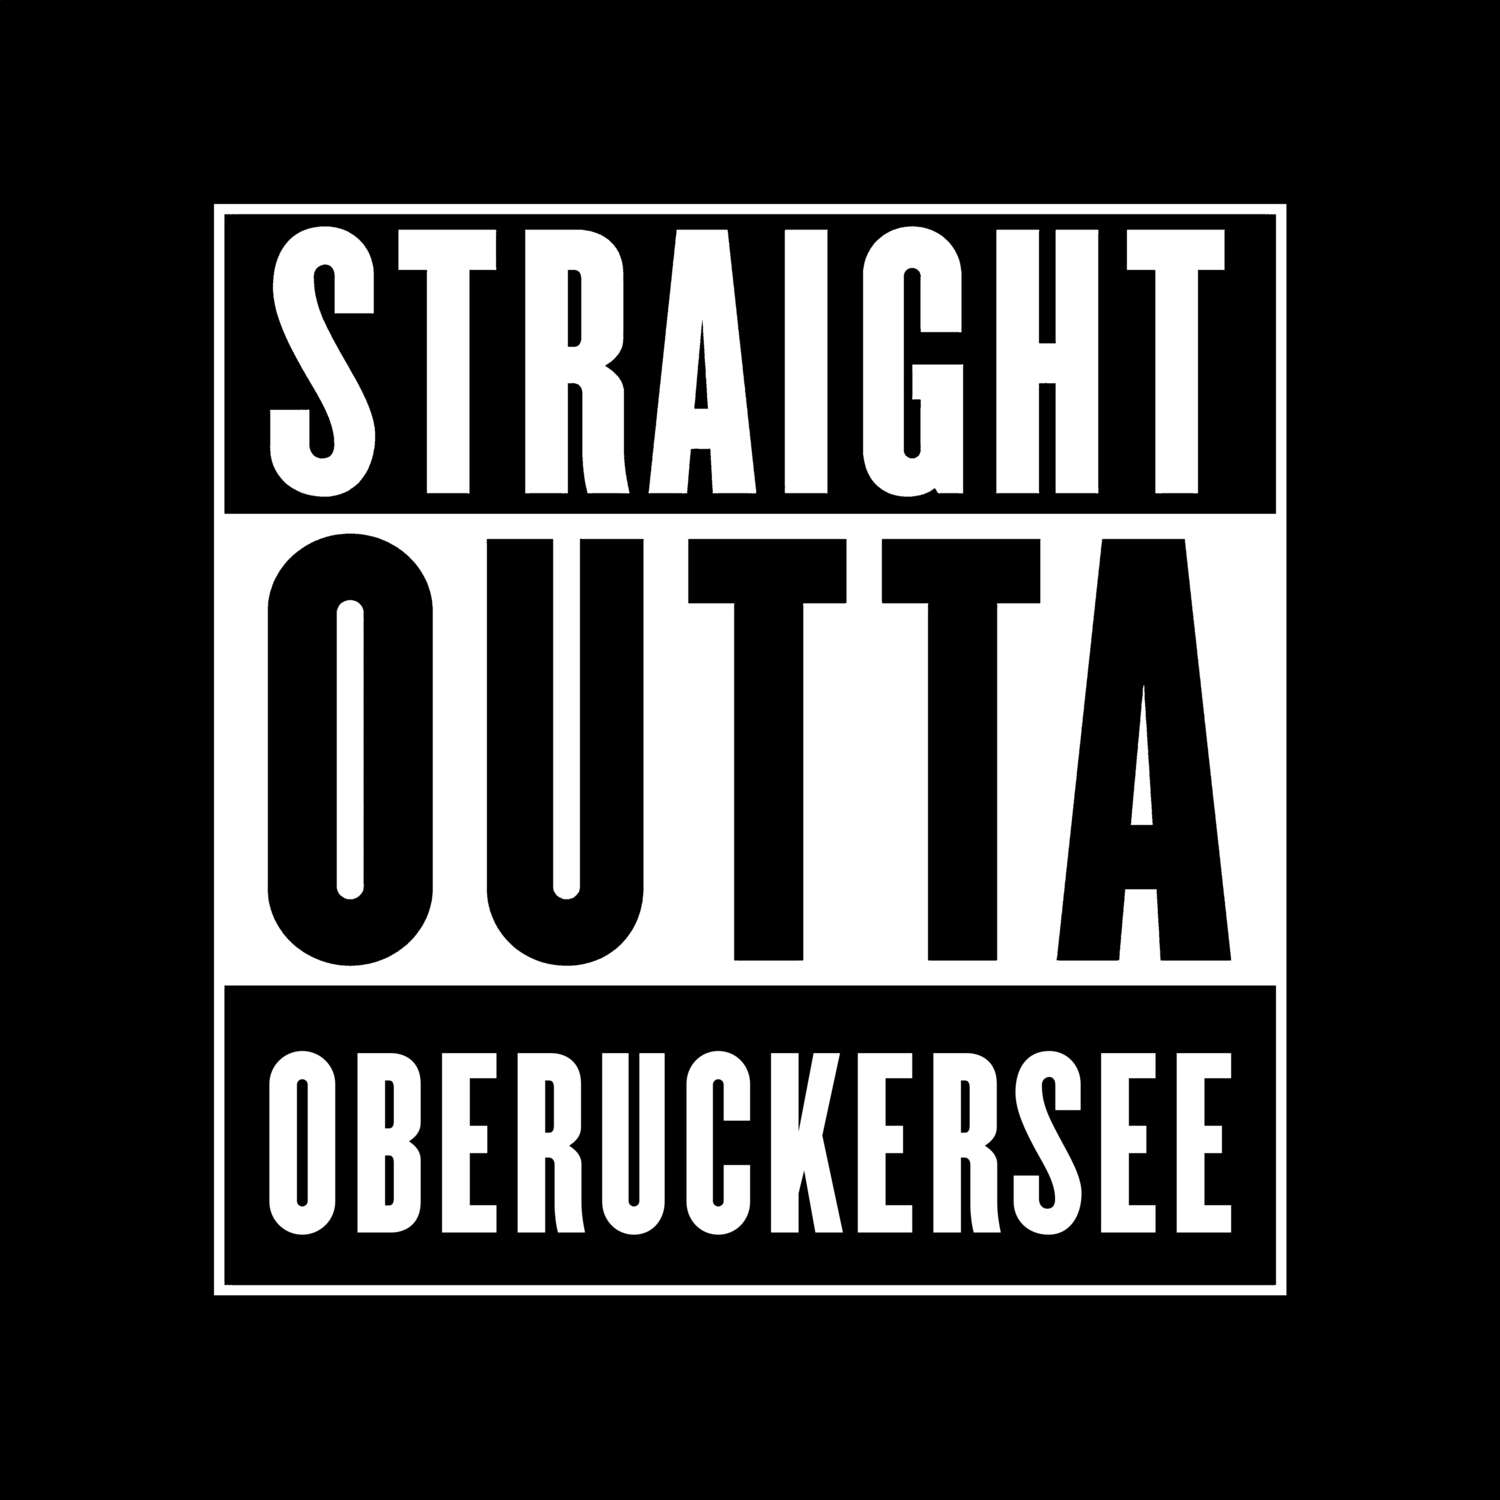 Oberuckersee T-Shirt »Straight Outta«